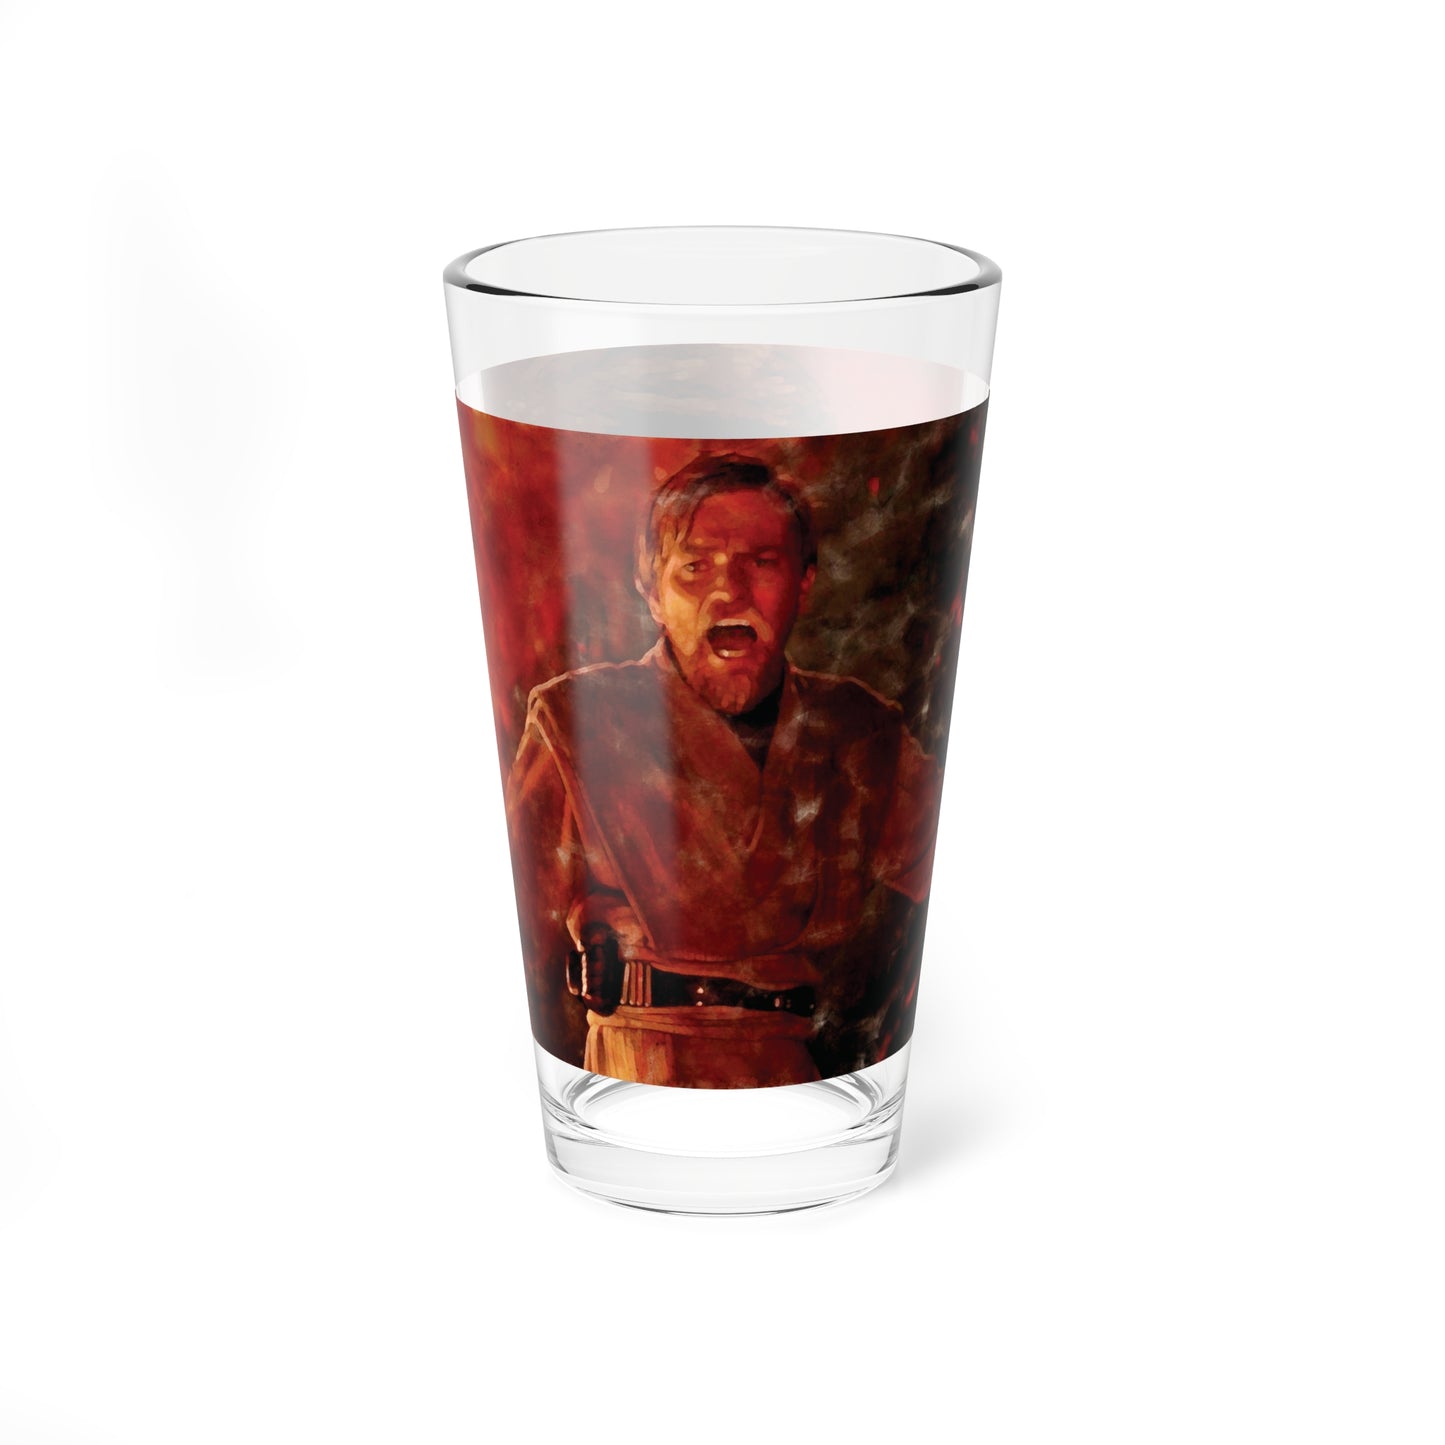 The High Ground - Star Wars Inspired Pint Glass - Drop #014